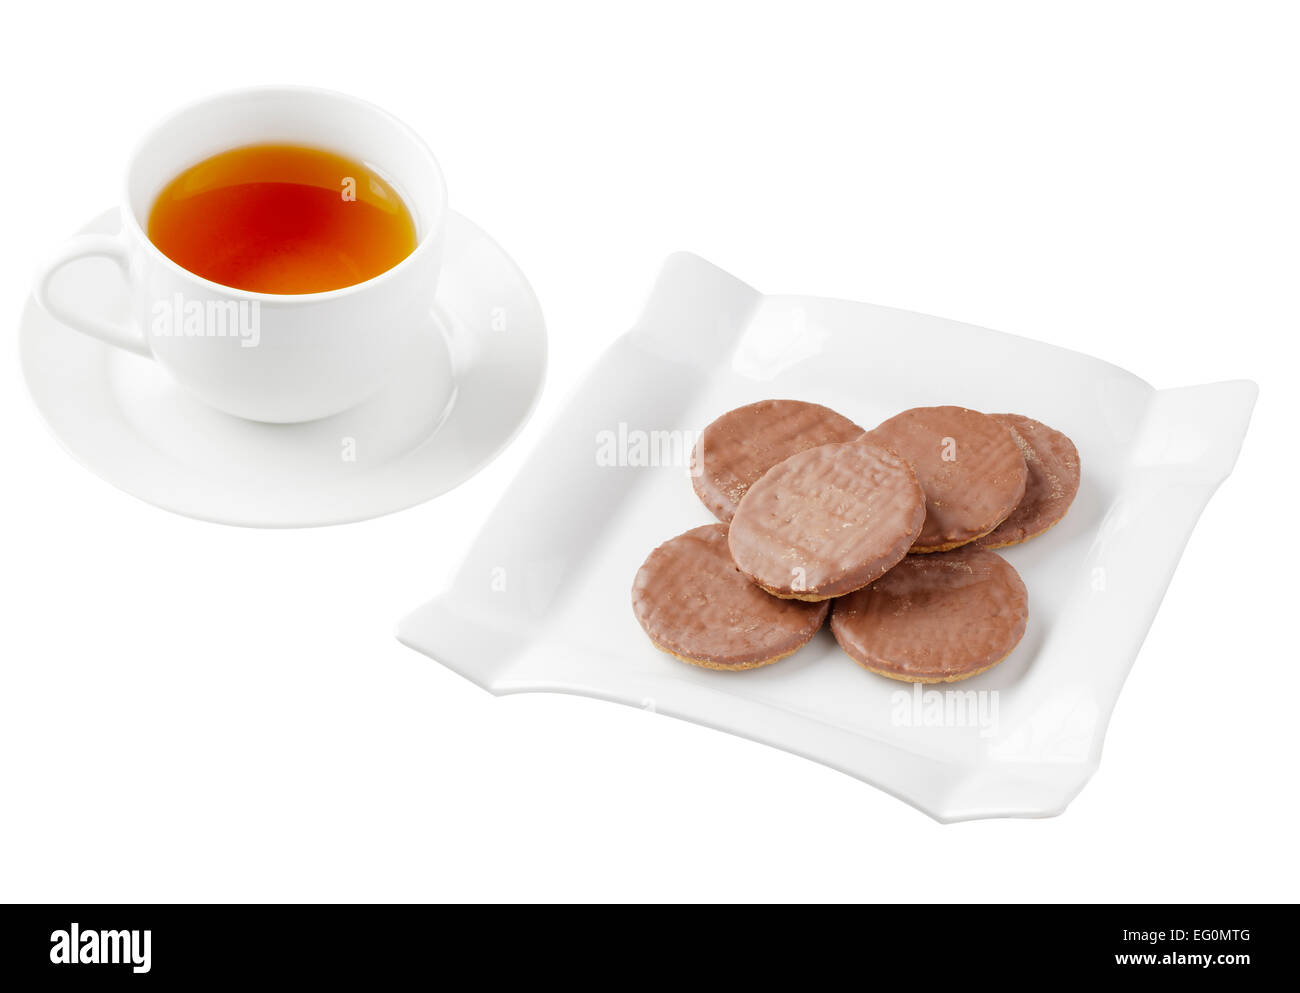 Cup of tea and Chocolate biscuits Stock Photo